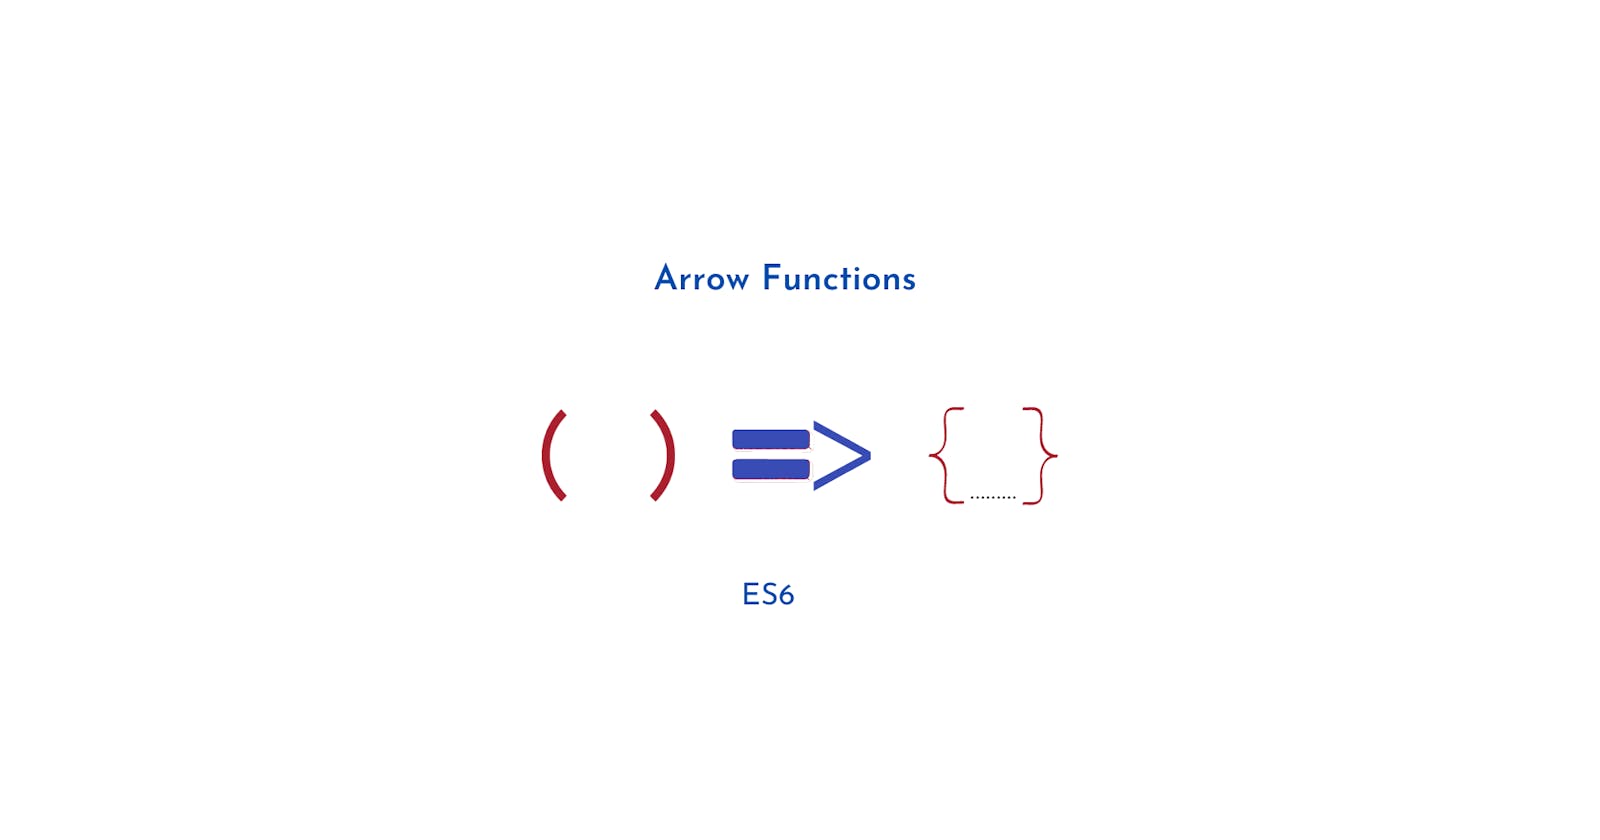 Why do we use Arrow Functions in JavaScript?